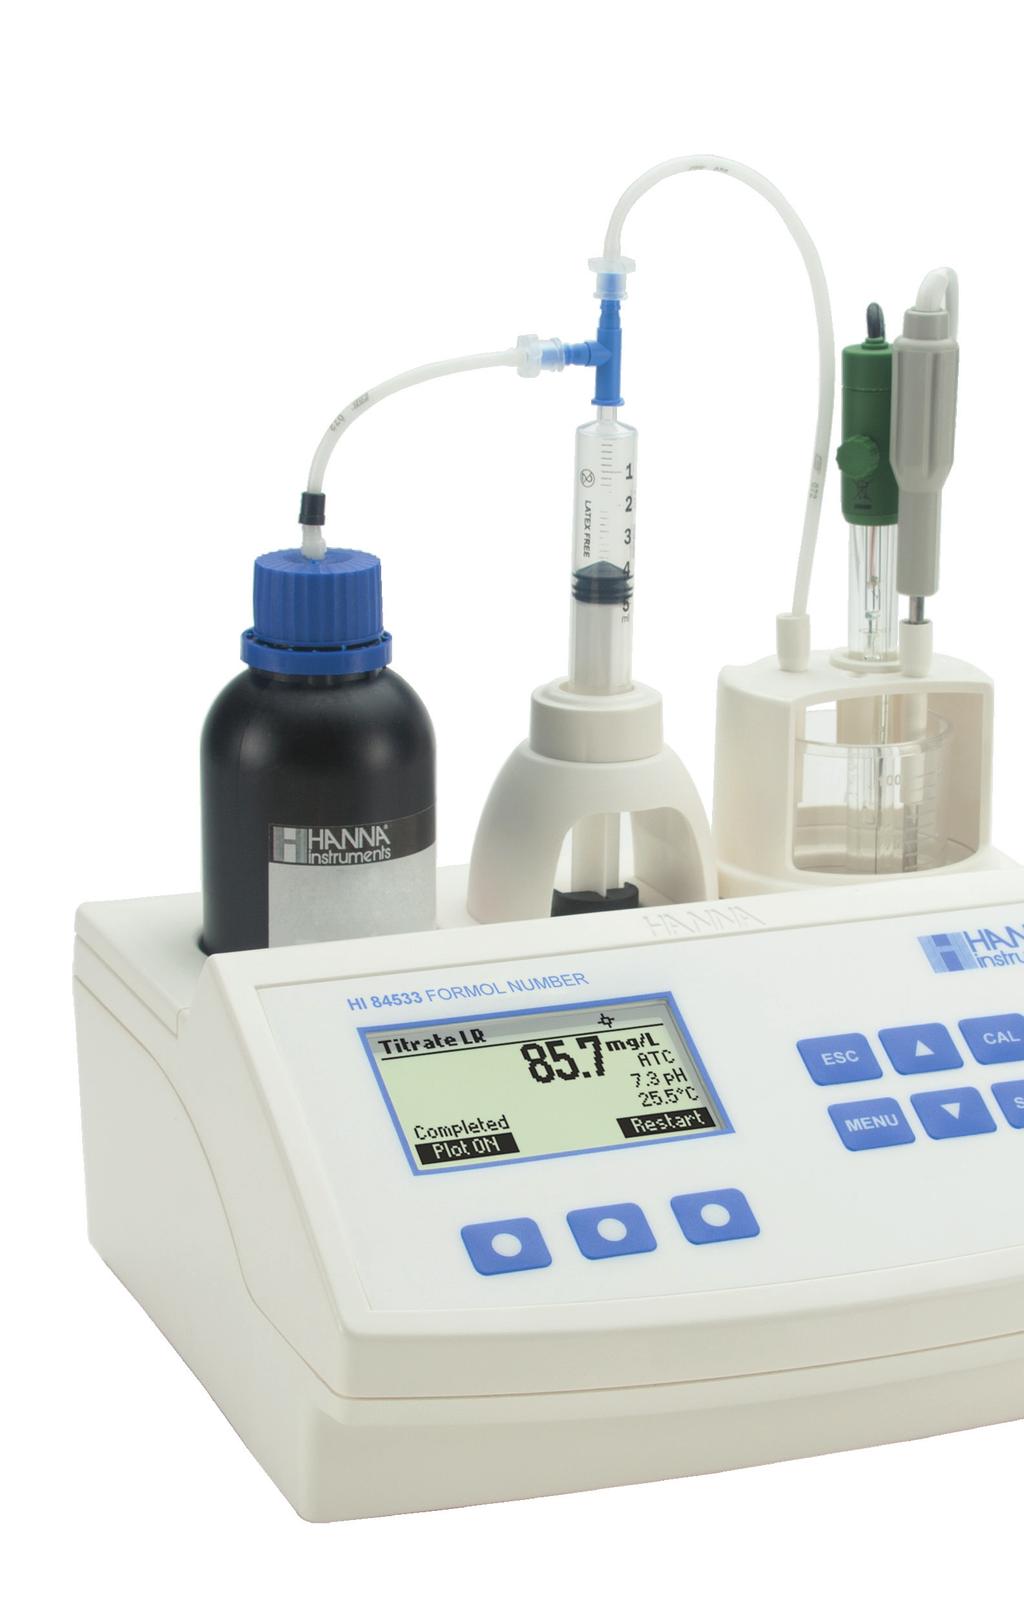 USB connection. Automatic Stirrer Speed Control Maintains stirrer speed at approximately 600 rpm regardless of viscosity of solution.